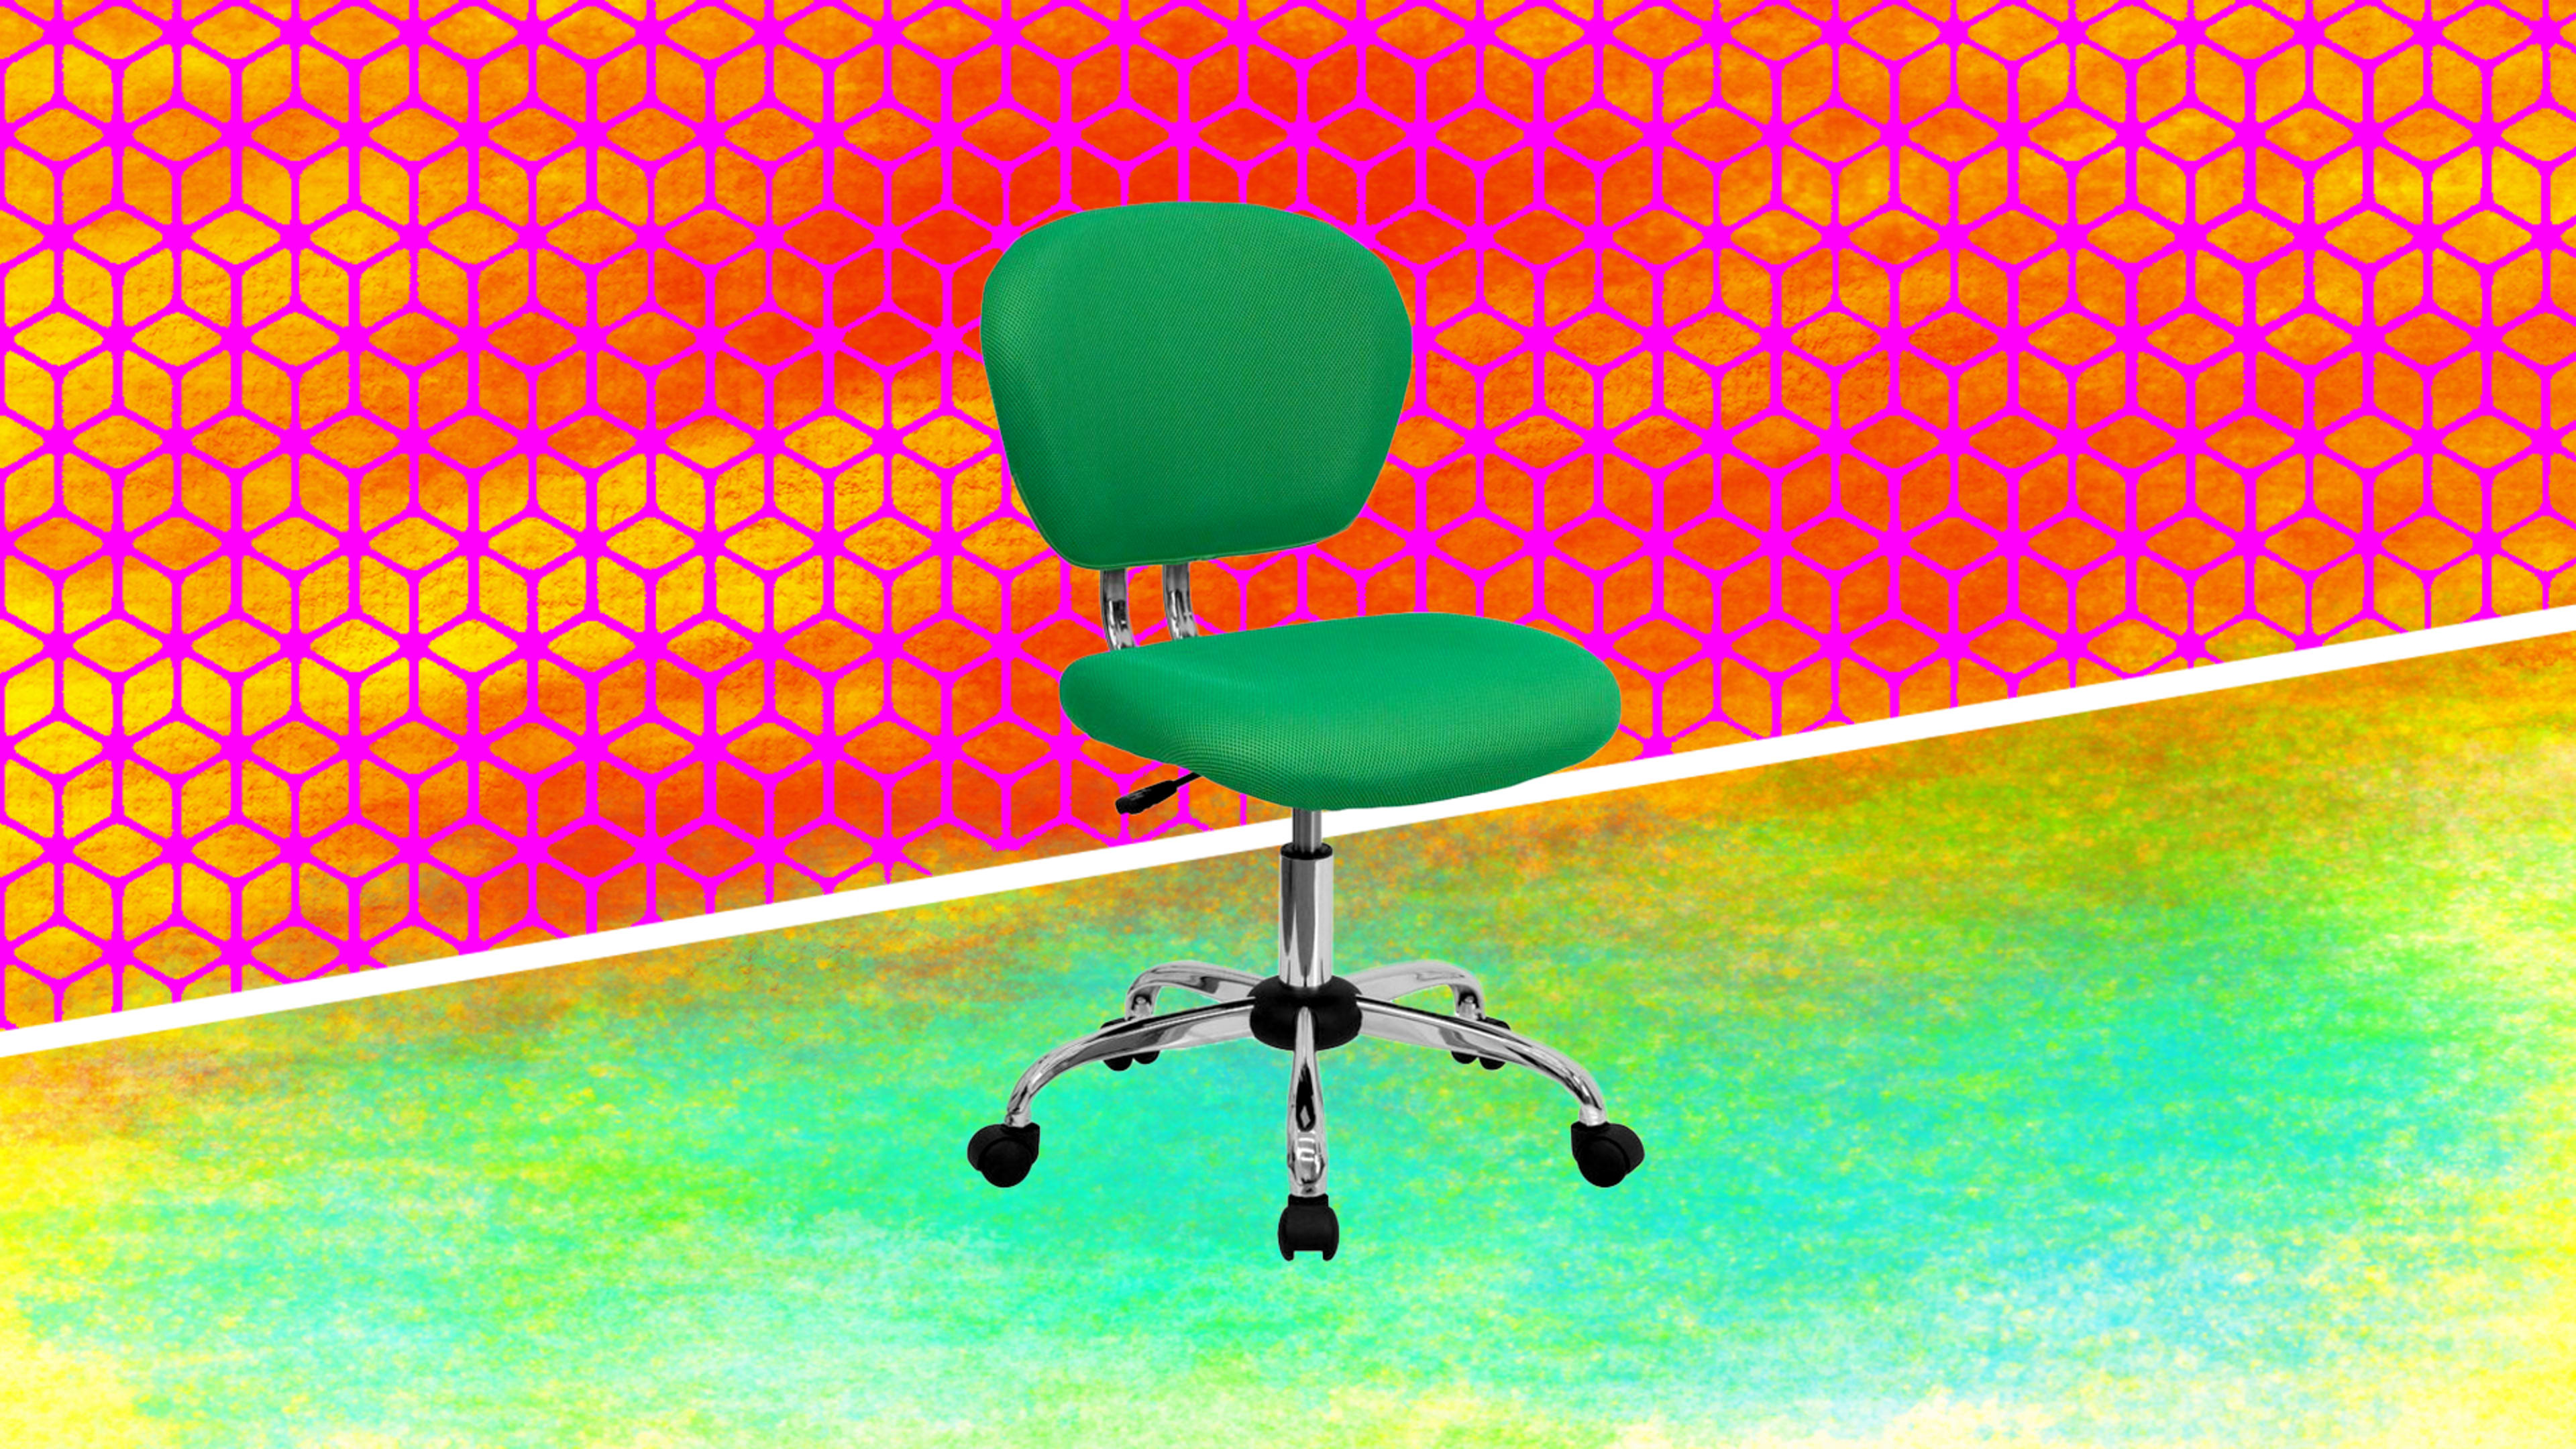 Ready to upgrade your home office? These well-designed desk chairs are up to 80% off right now